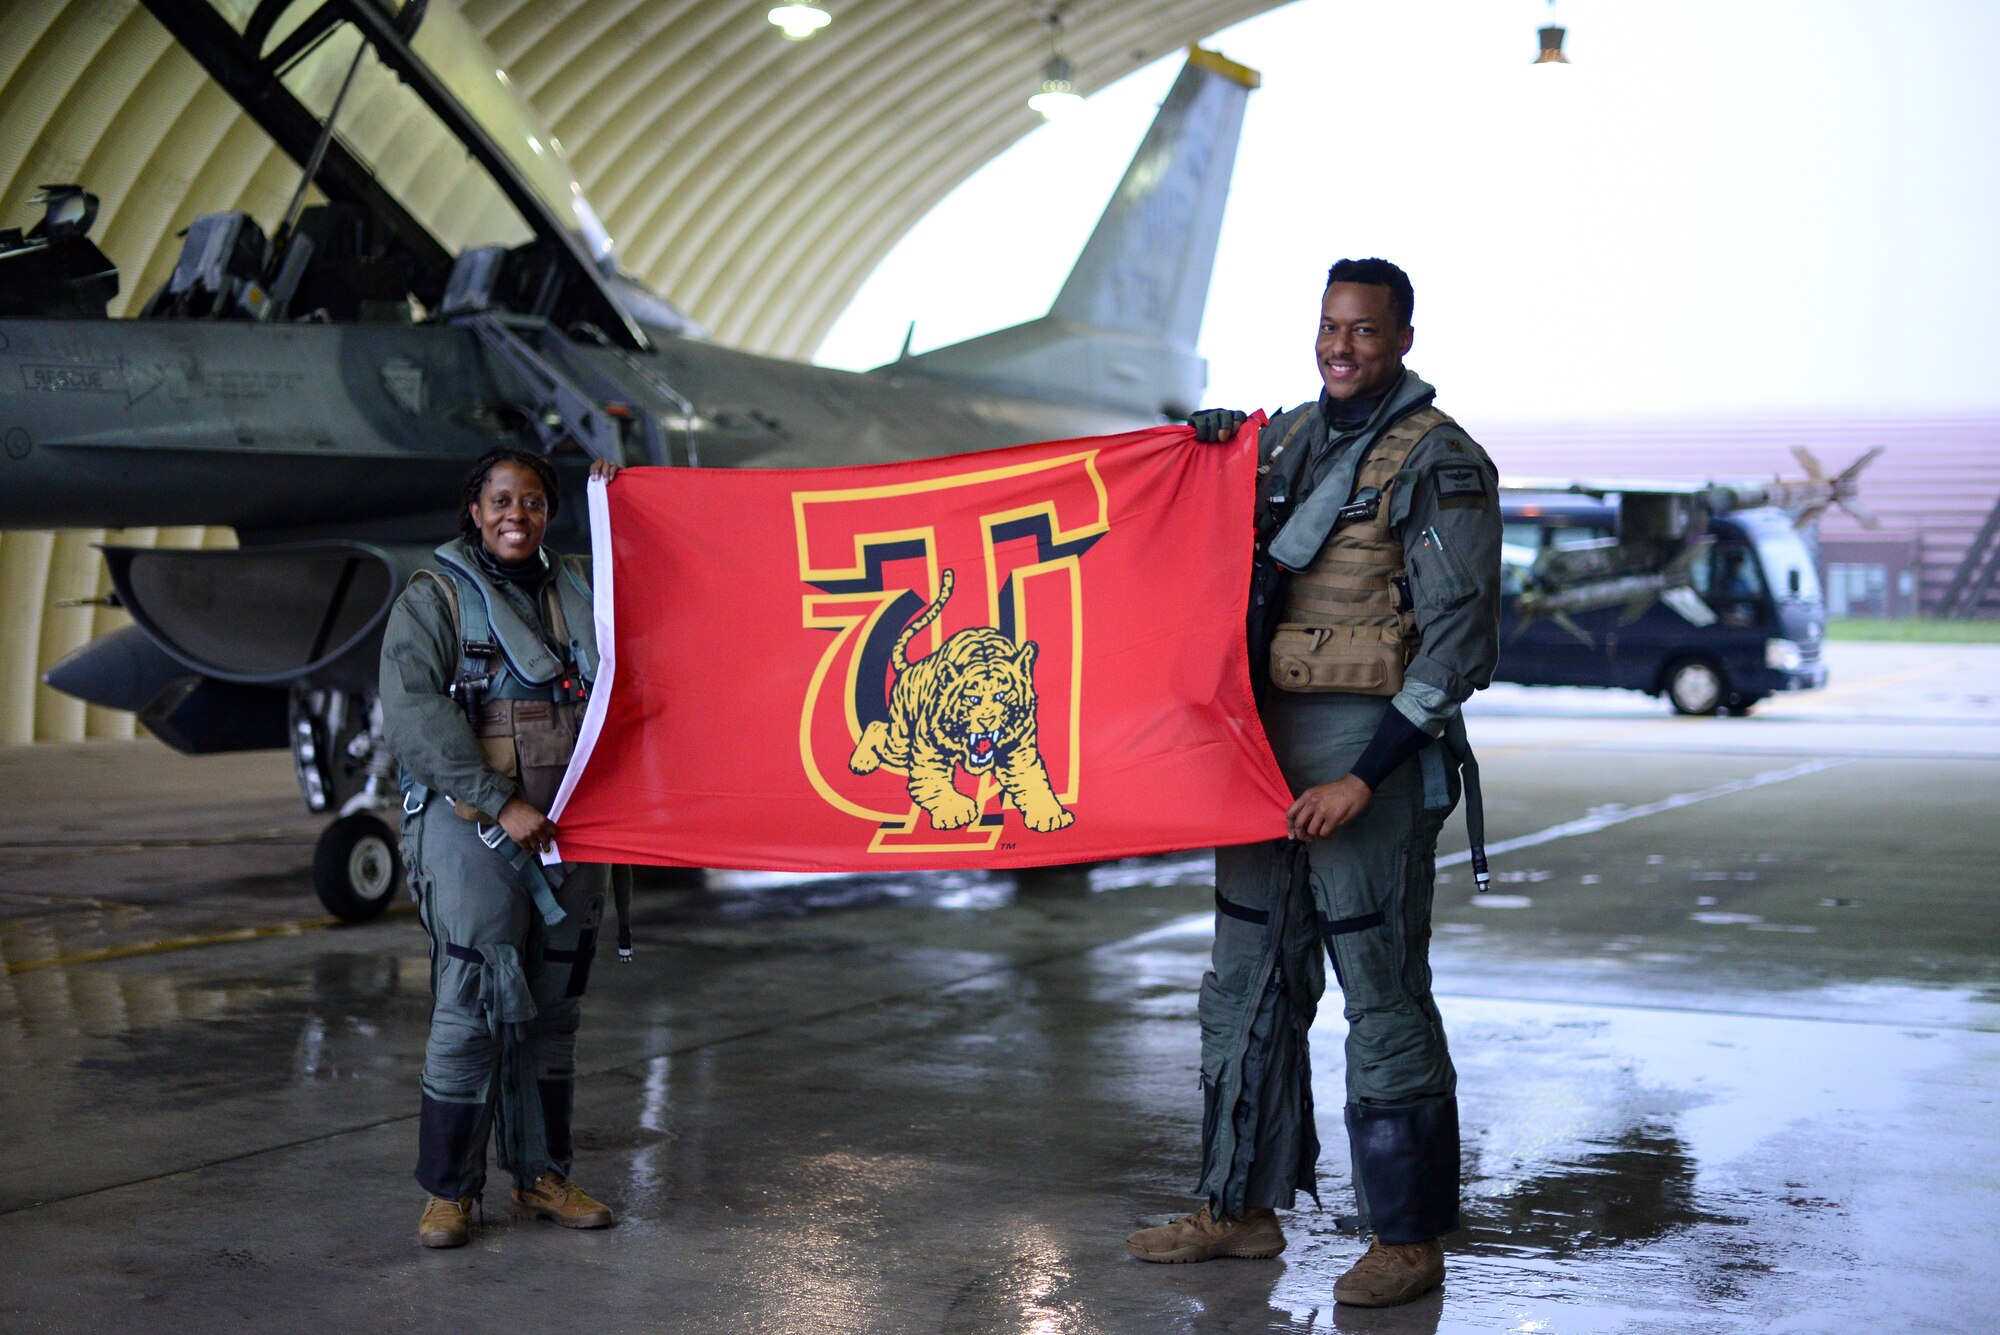 Two Airmen pose for a photo.